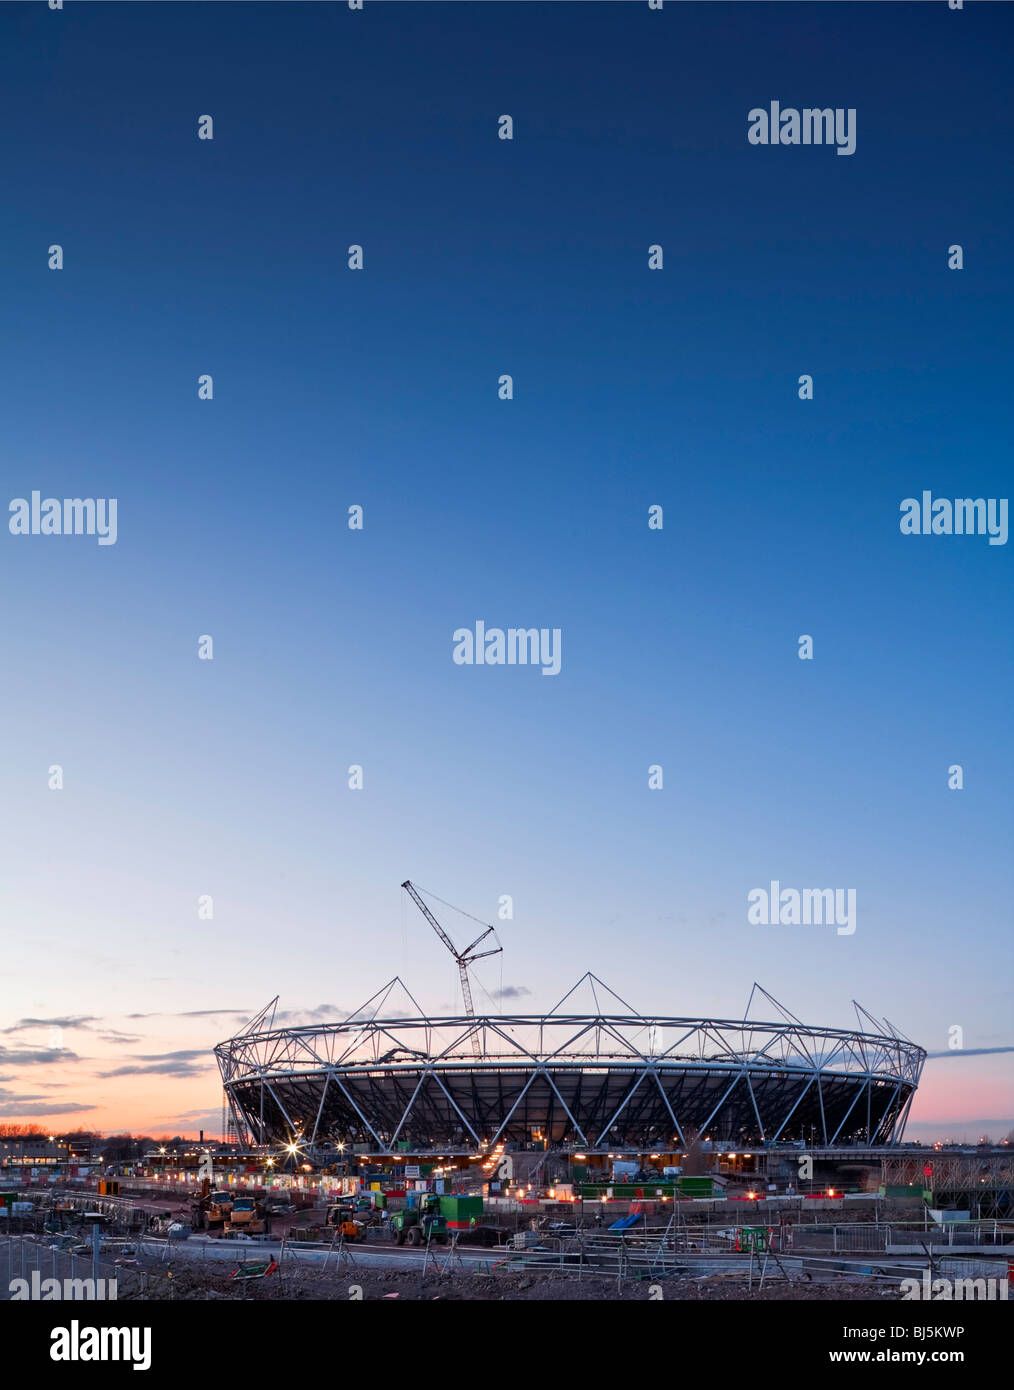 The Olympic Stadium site in Stratford, London. Stock Photo